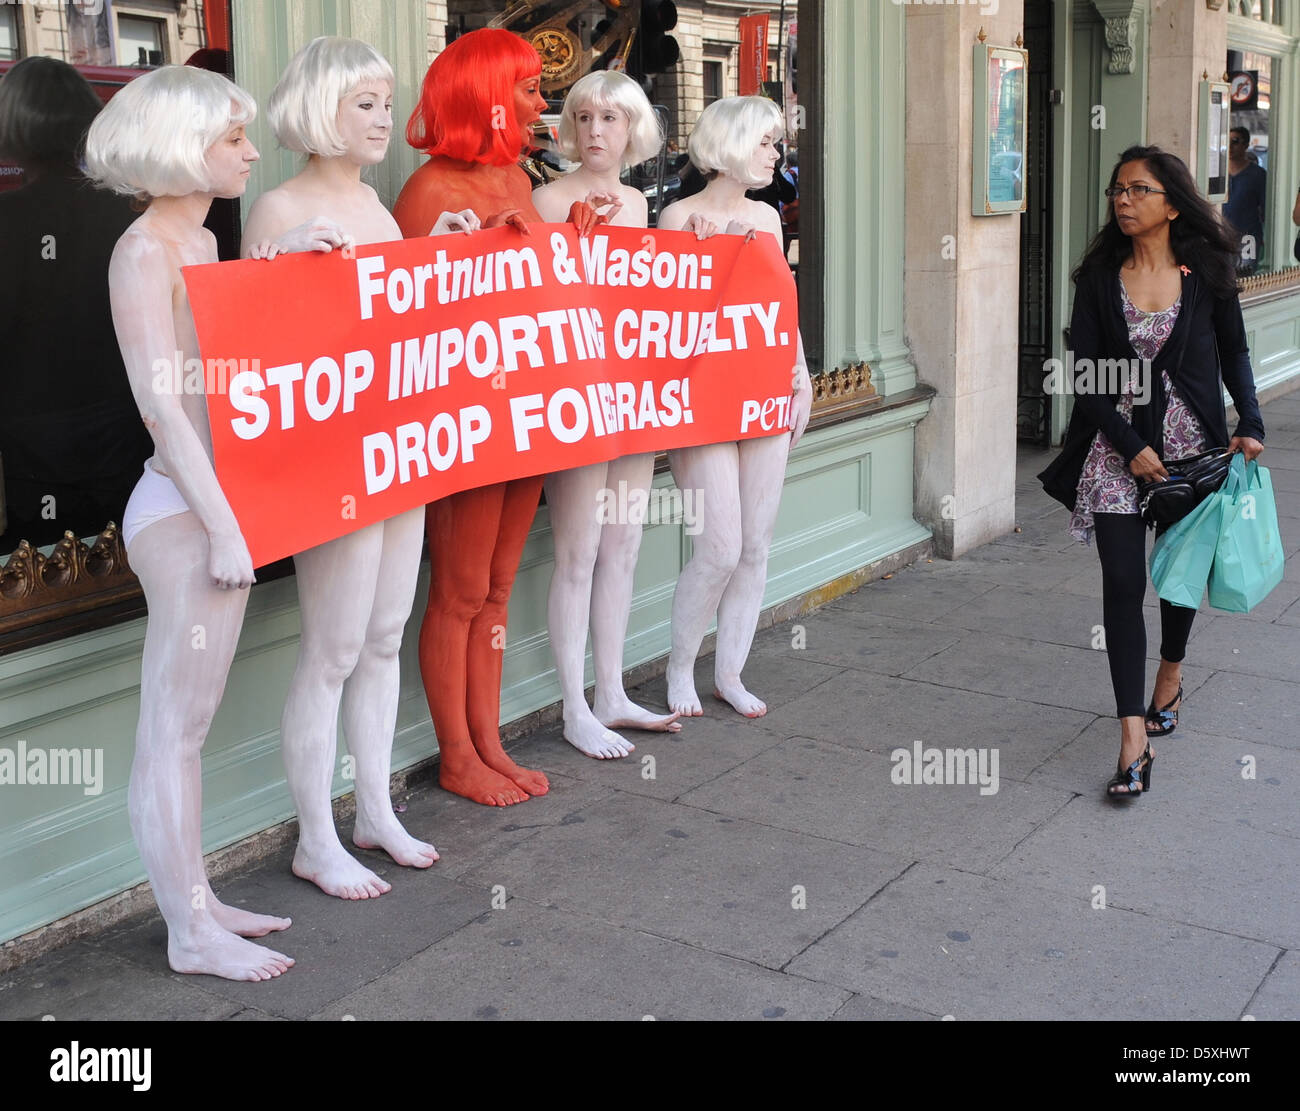 Atmosphere PETA activists protest against the sale of foie gras attnum & Mason The demonstrators are painted red and white Stock Photo